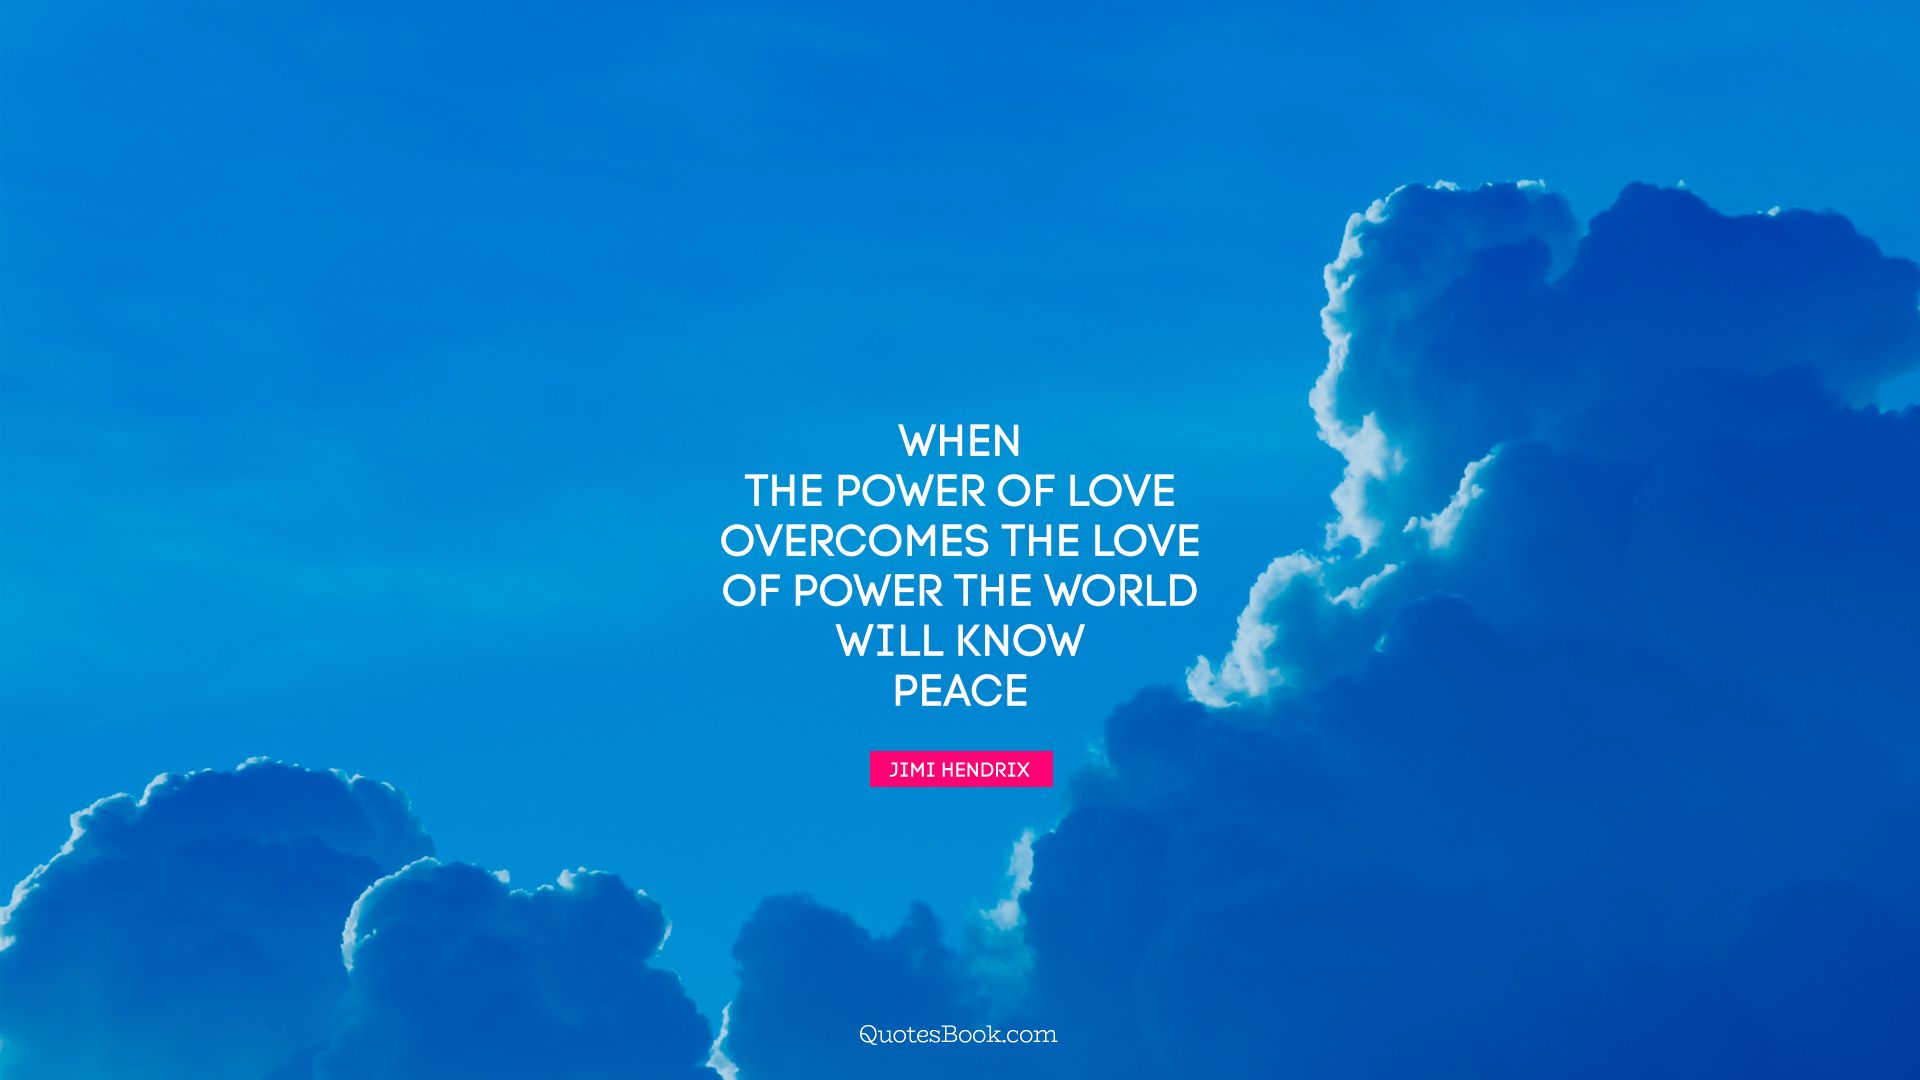 When the power of love overcomes the love of power the world will know peace. - Quote by Jimi Hendrix